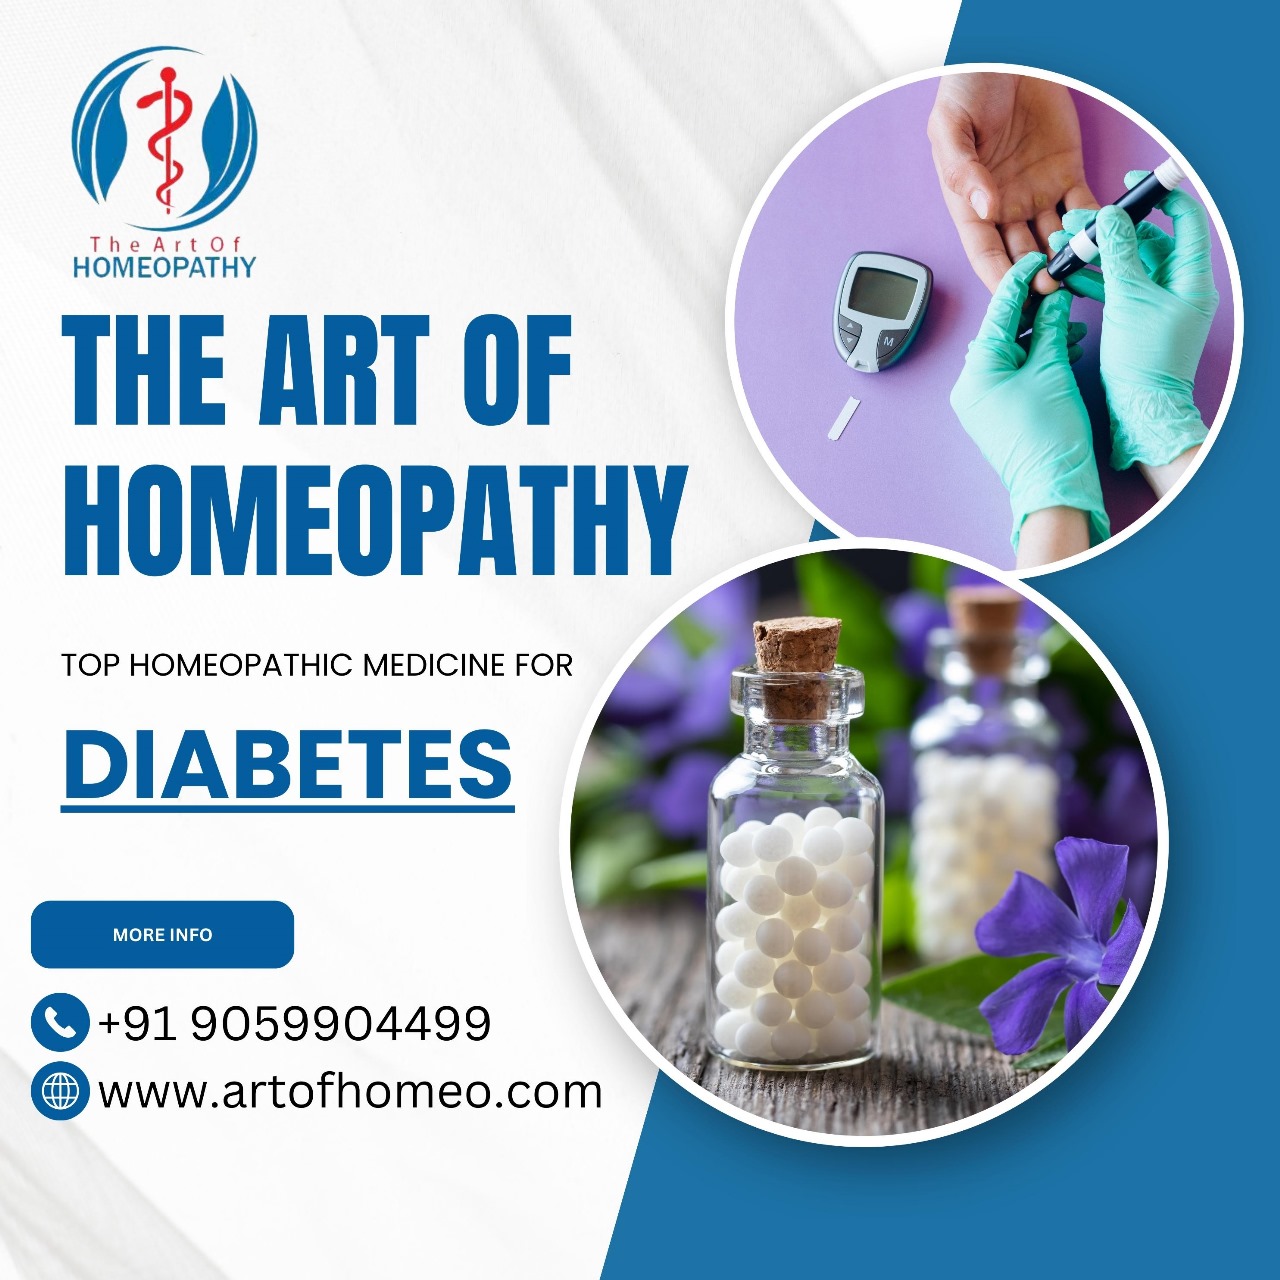 TOP HOMEOPATHIC MEDICINE FOR DIABETES